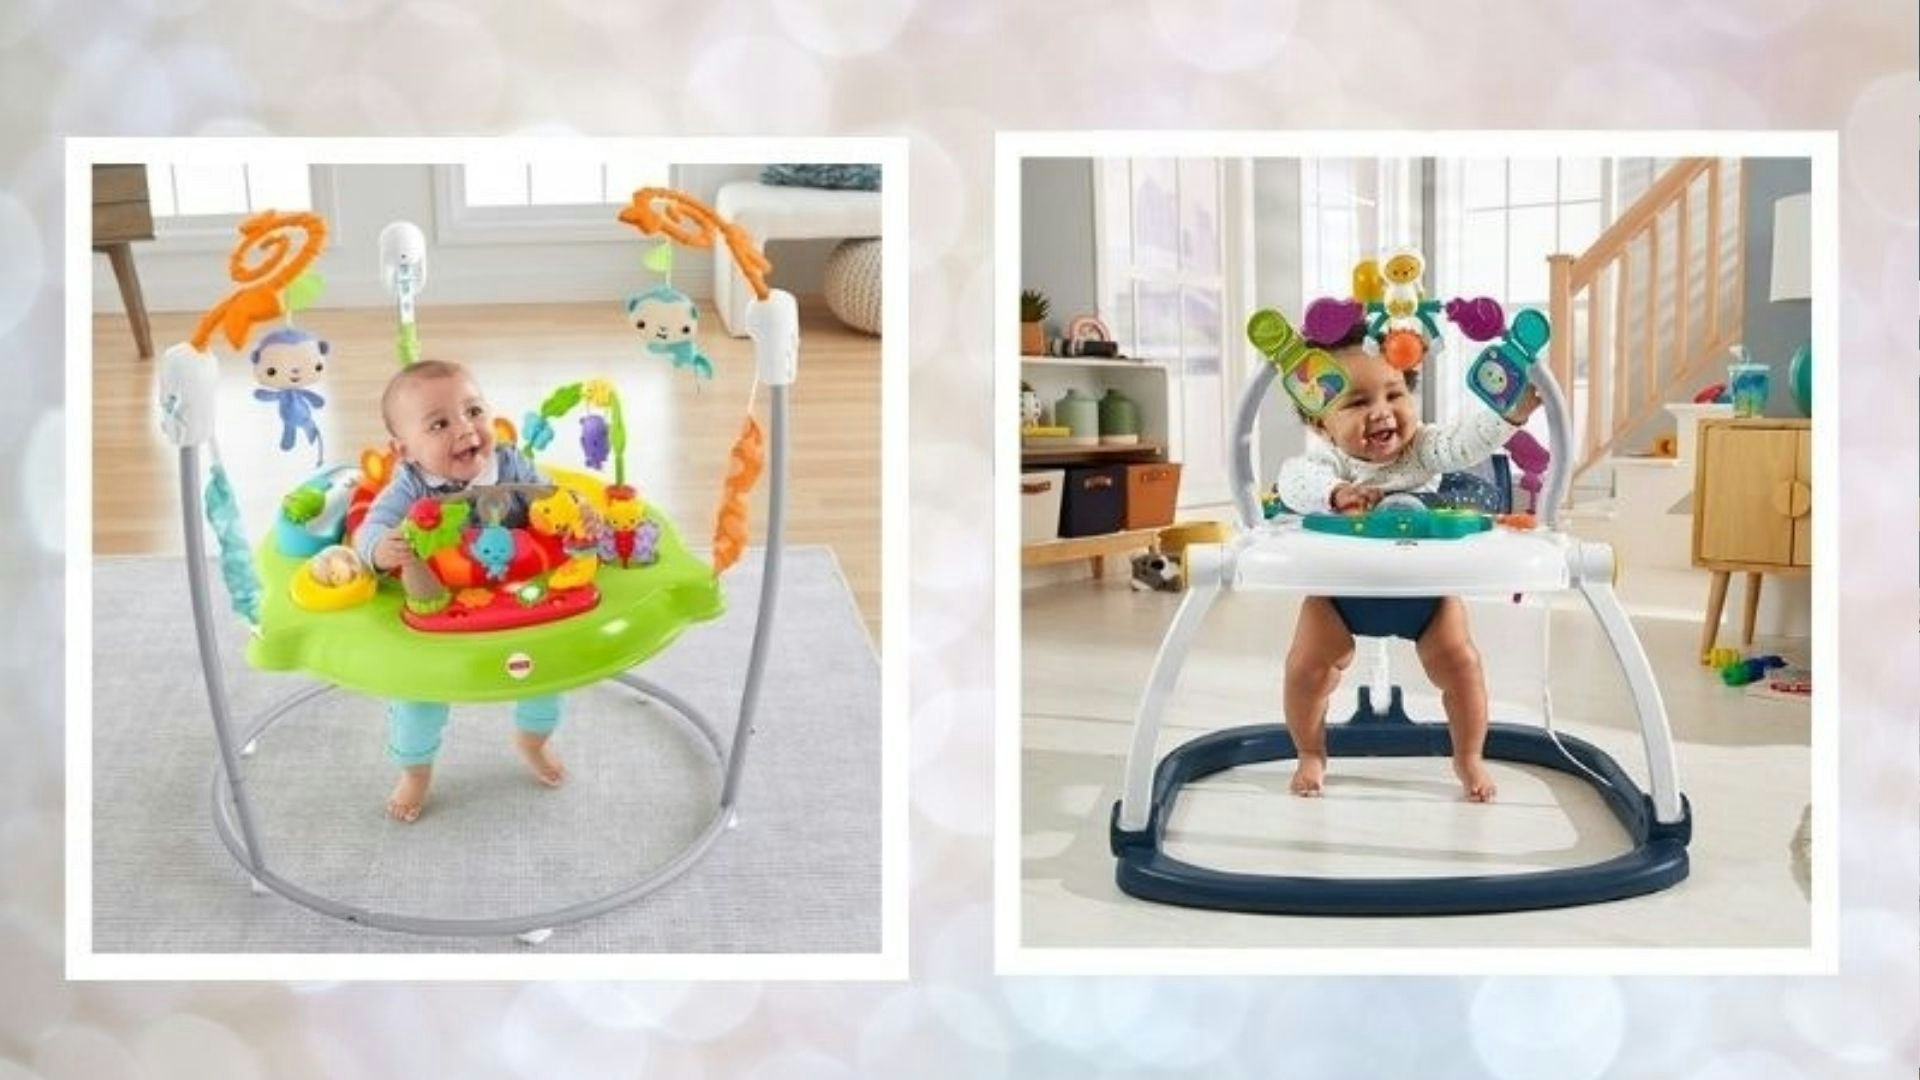 Fisher-Price Leaping Leopard Jumperoo Activity Center